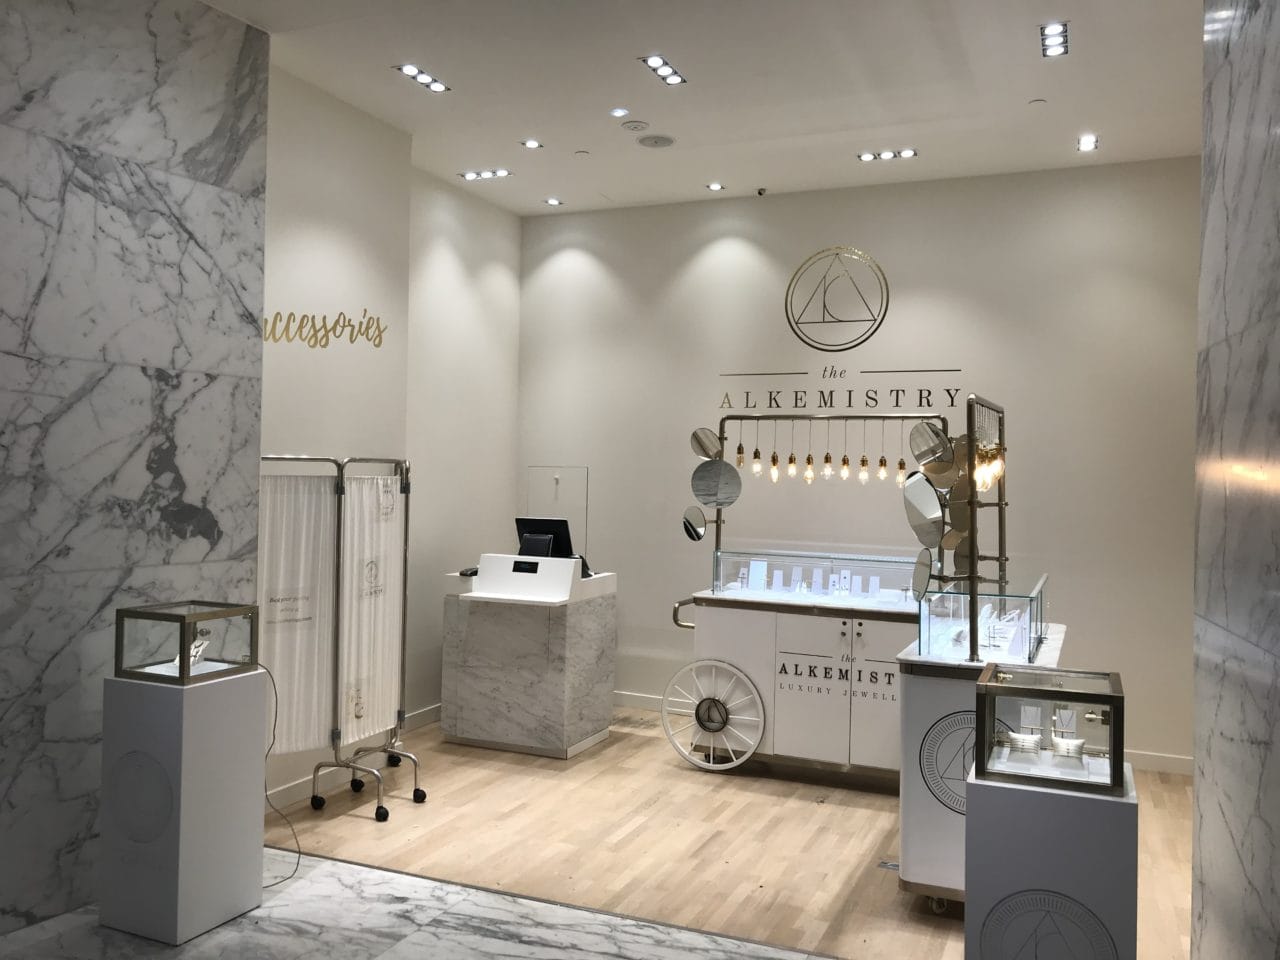 The Alkemistry store with various glass displays and marble patterned walls from the right angle.